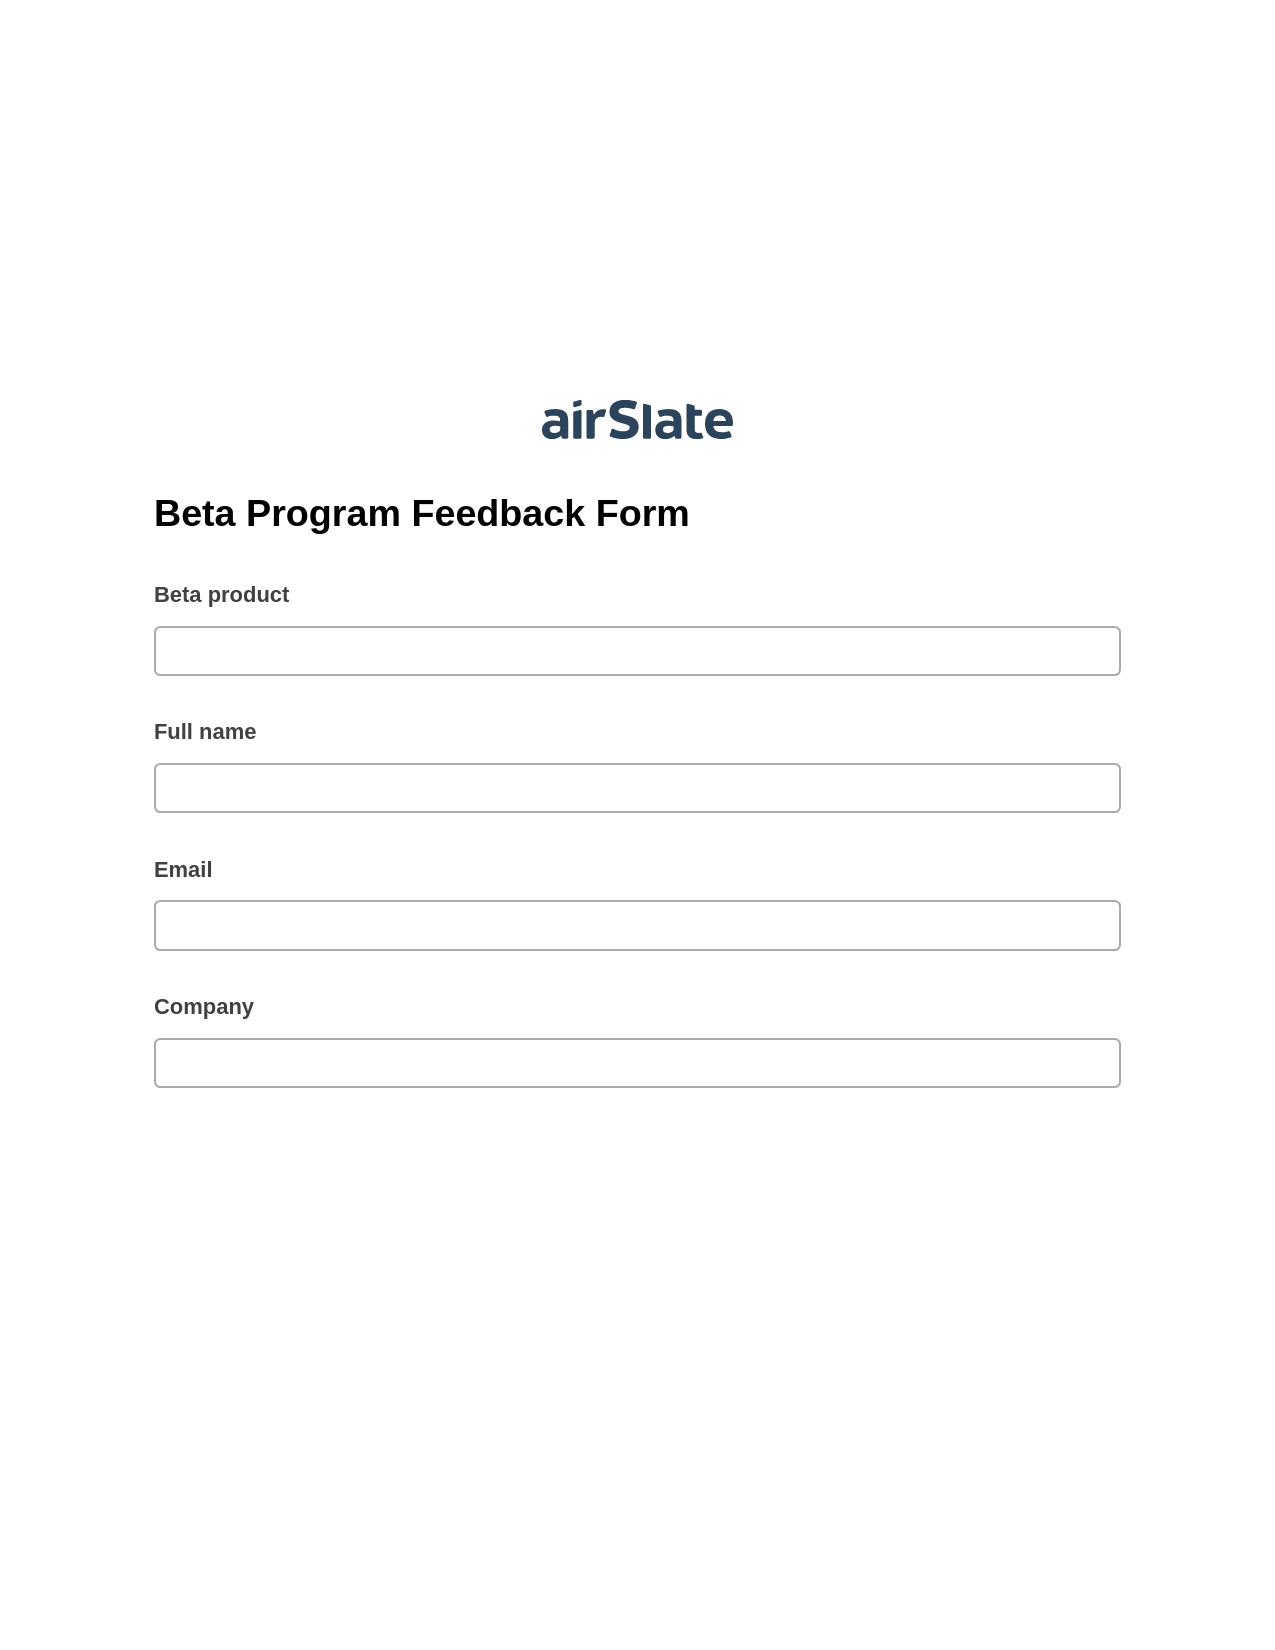 Beta Program Feedback Form Pre-fill Slate from MS Dynamics 365 Records Bot, Remove Tags From Slate Bot, Dropbox Bot